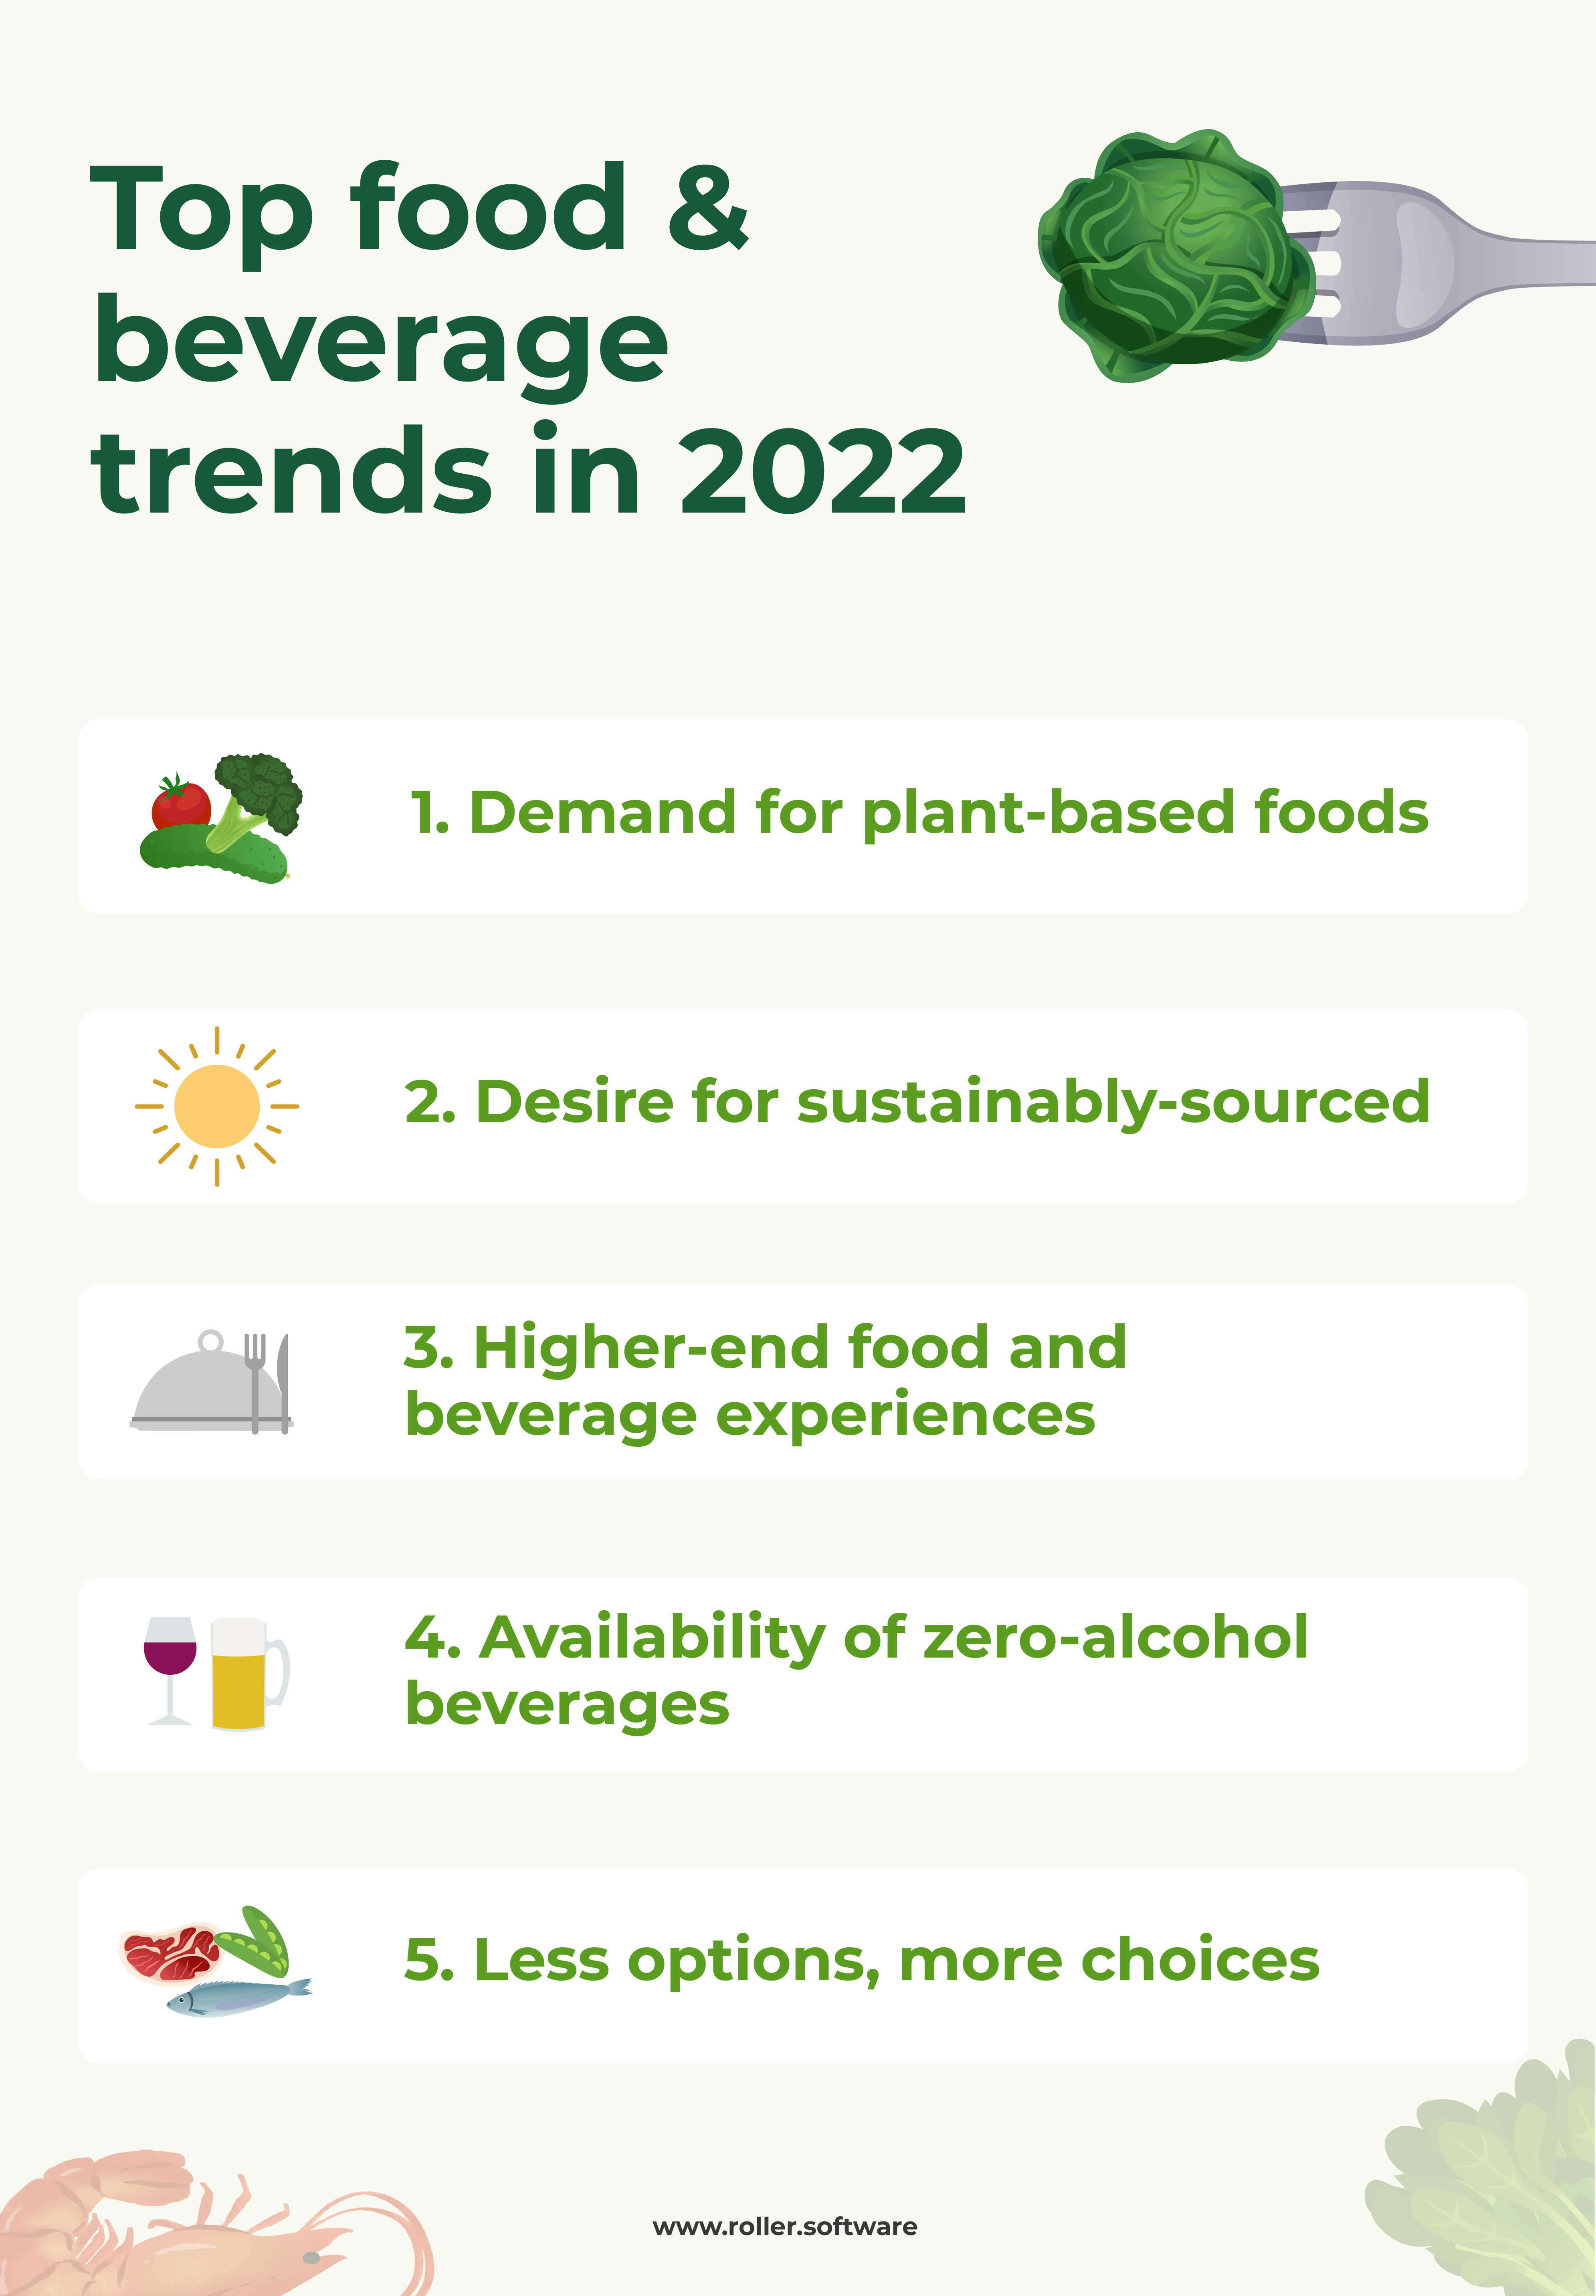 Top food and beverage trends in 2022